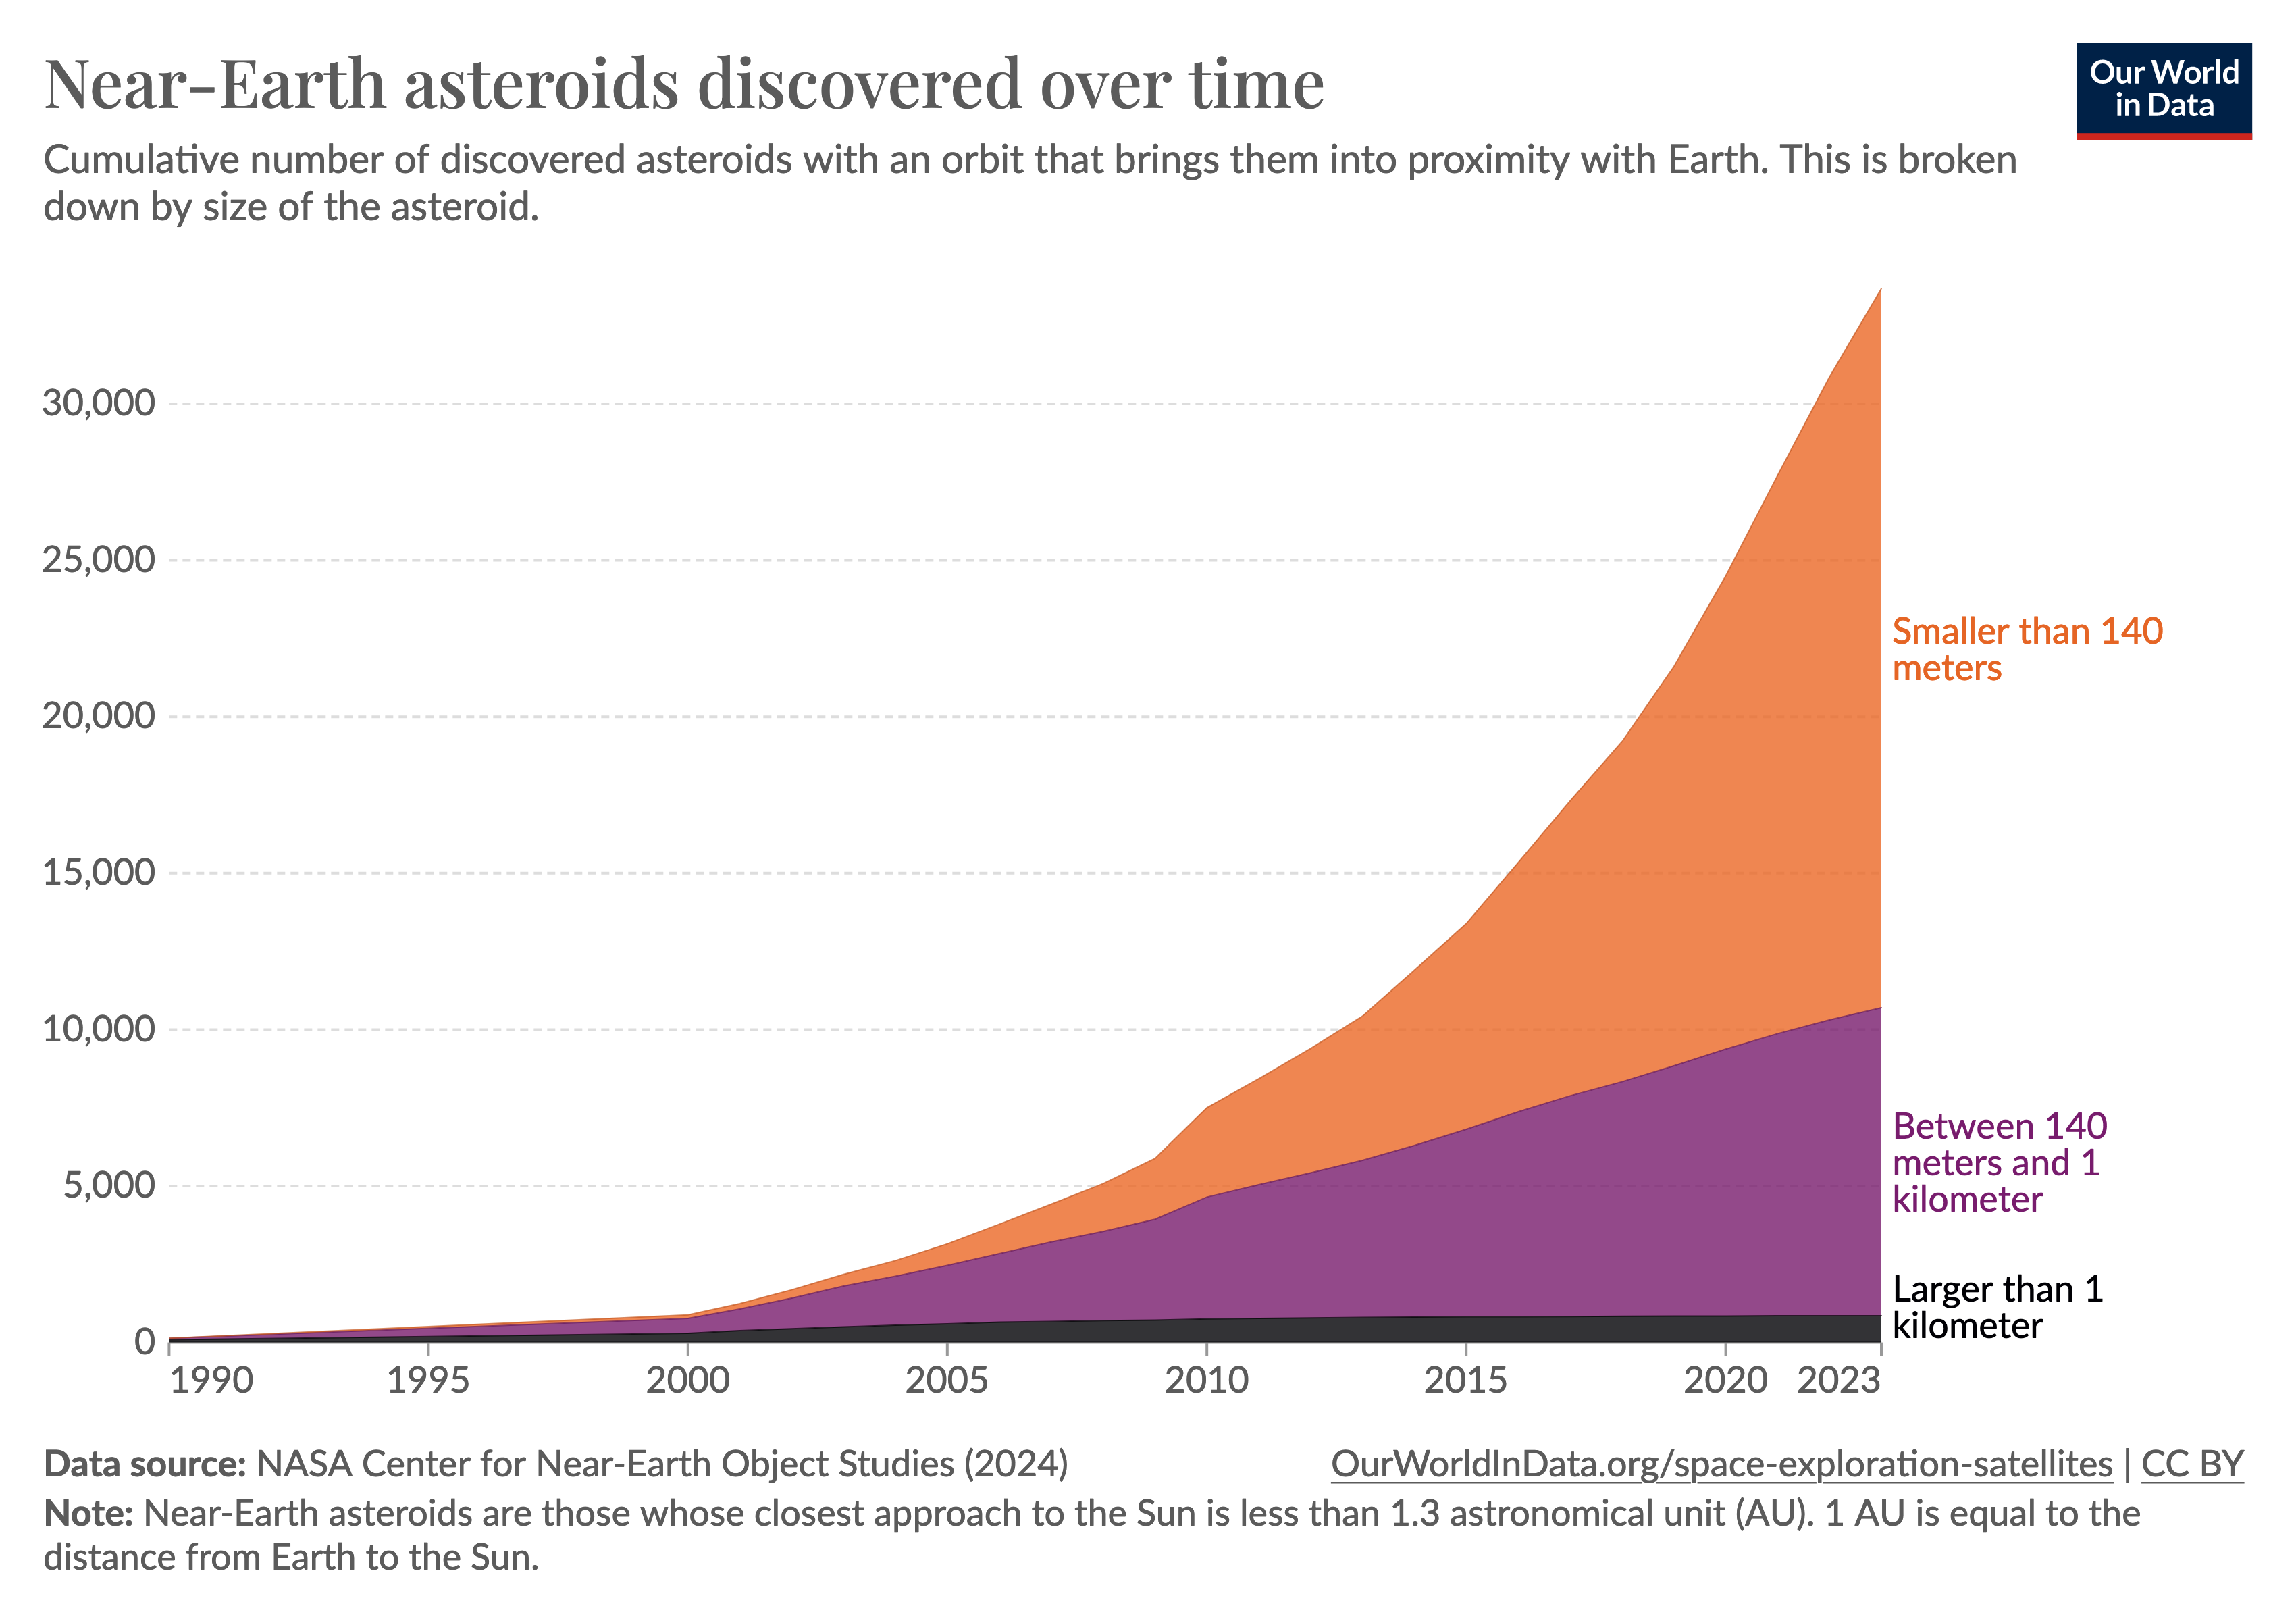 Graph titled 'Near-Earth asteroids discovered over time' from Our World in Data, showing the cumulative number of discovered asteroids with an orbit close to Earth from 1990 to 2023. The graph displays three layers: asteroids larger than 1 kilometer in dark purple at the bottom, those between 140 meters and 1 kilometer in purple in the middle, and smaller than 140 meters in orange at the top. The overall trend shows a significant increase over time. The data source is credited to the NASA Center for Near-Earth Object Studies (2024). A note clarifies that Near-Earth asteroids are defined as those whose closest approach to the Sun is less than 1.3 astronomical units (AU), with 1 AU being the distance from Earth to the Sun.